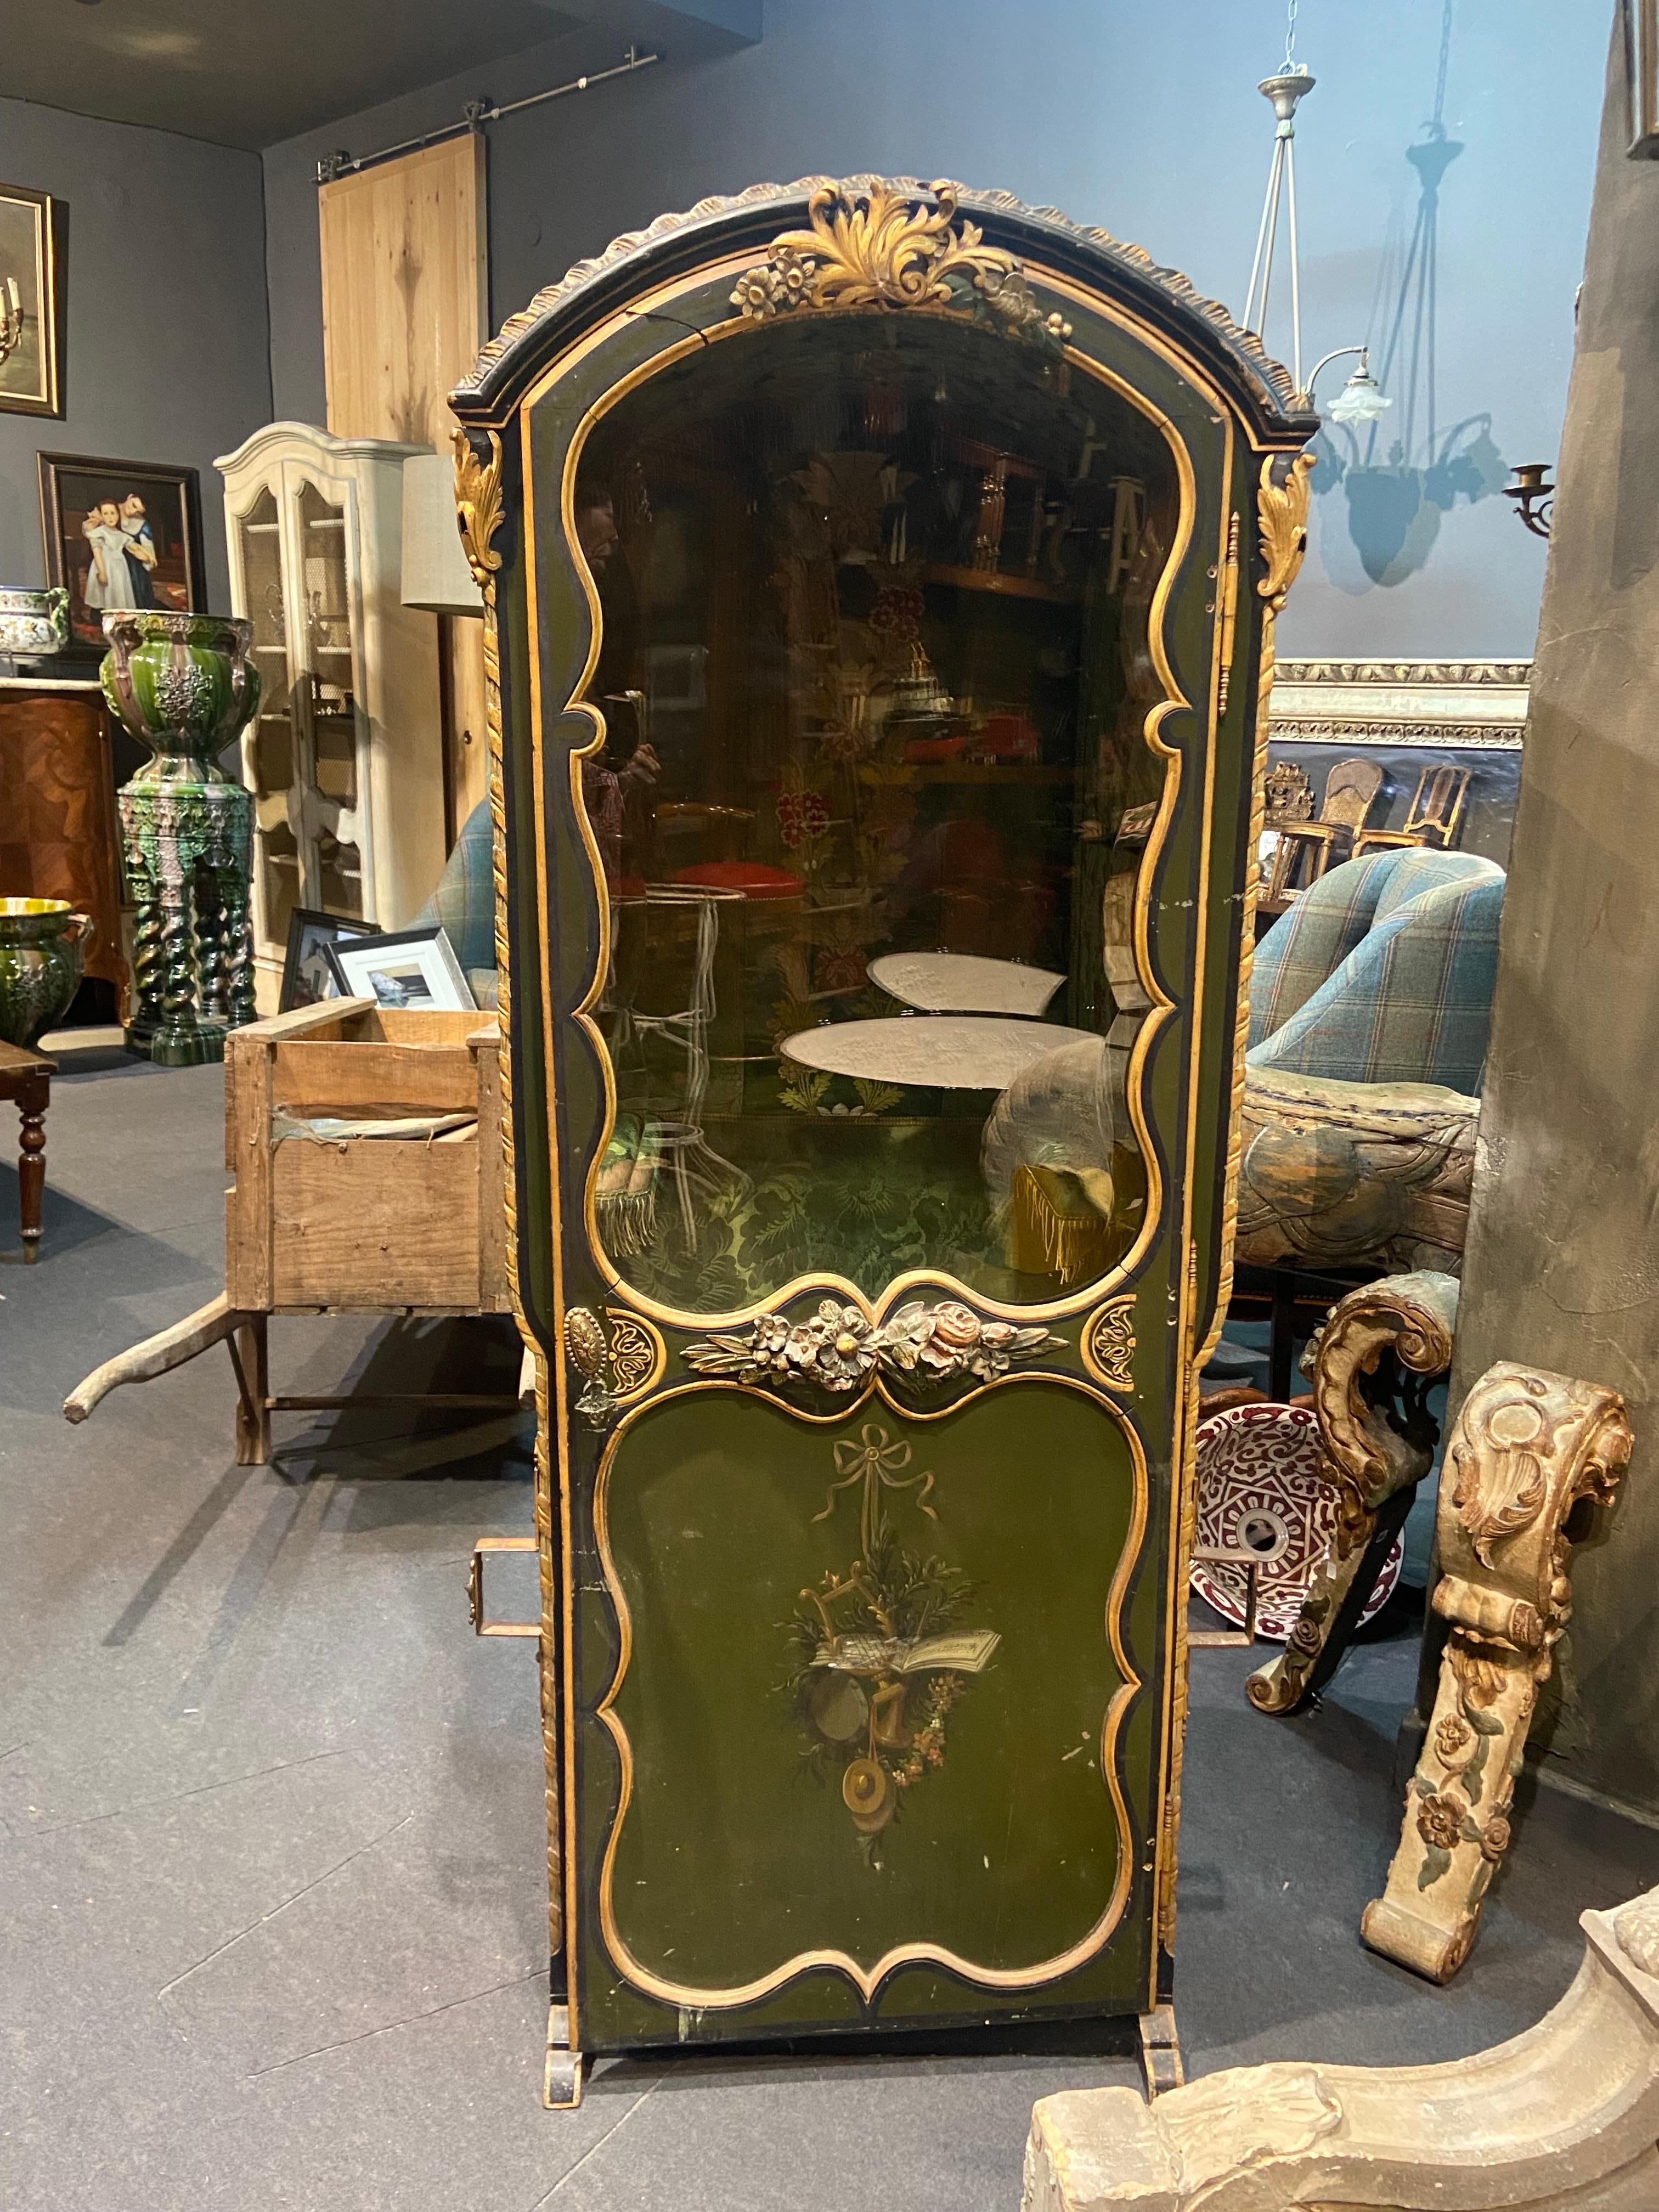 19th Century French sedan chair made of hand carved gilded wood hand painted with music trophy, wedding rings at the back and lots of flowers all around. It opens with a beveled original glass door. The interior lined with green silk brocade and